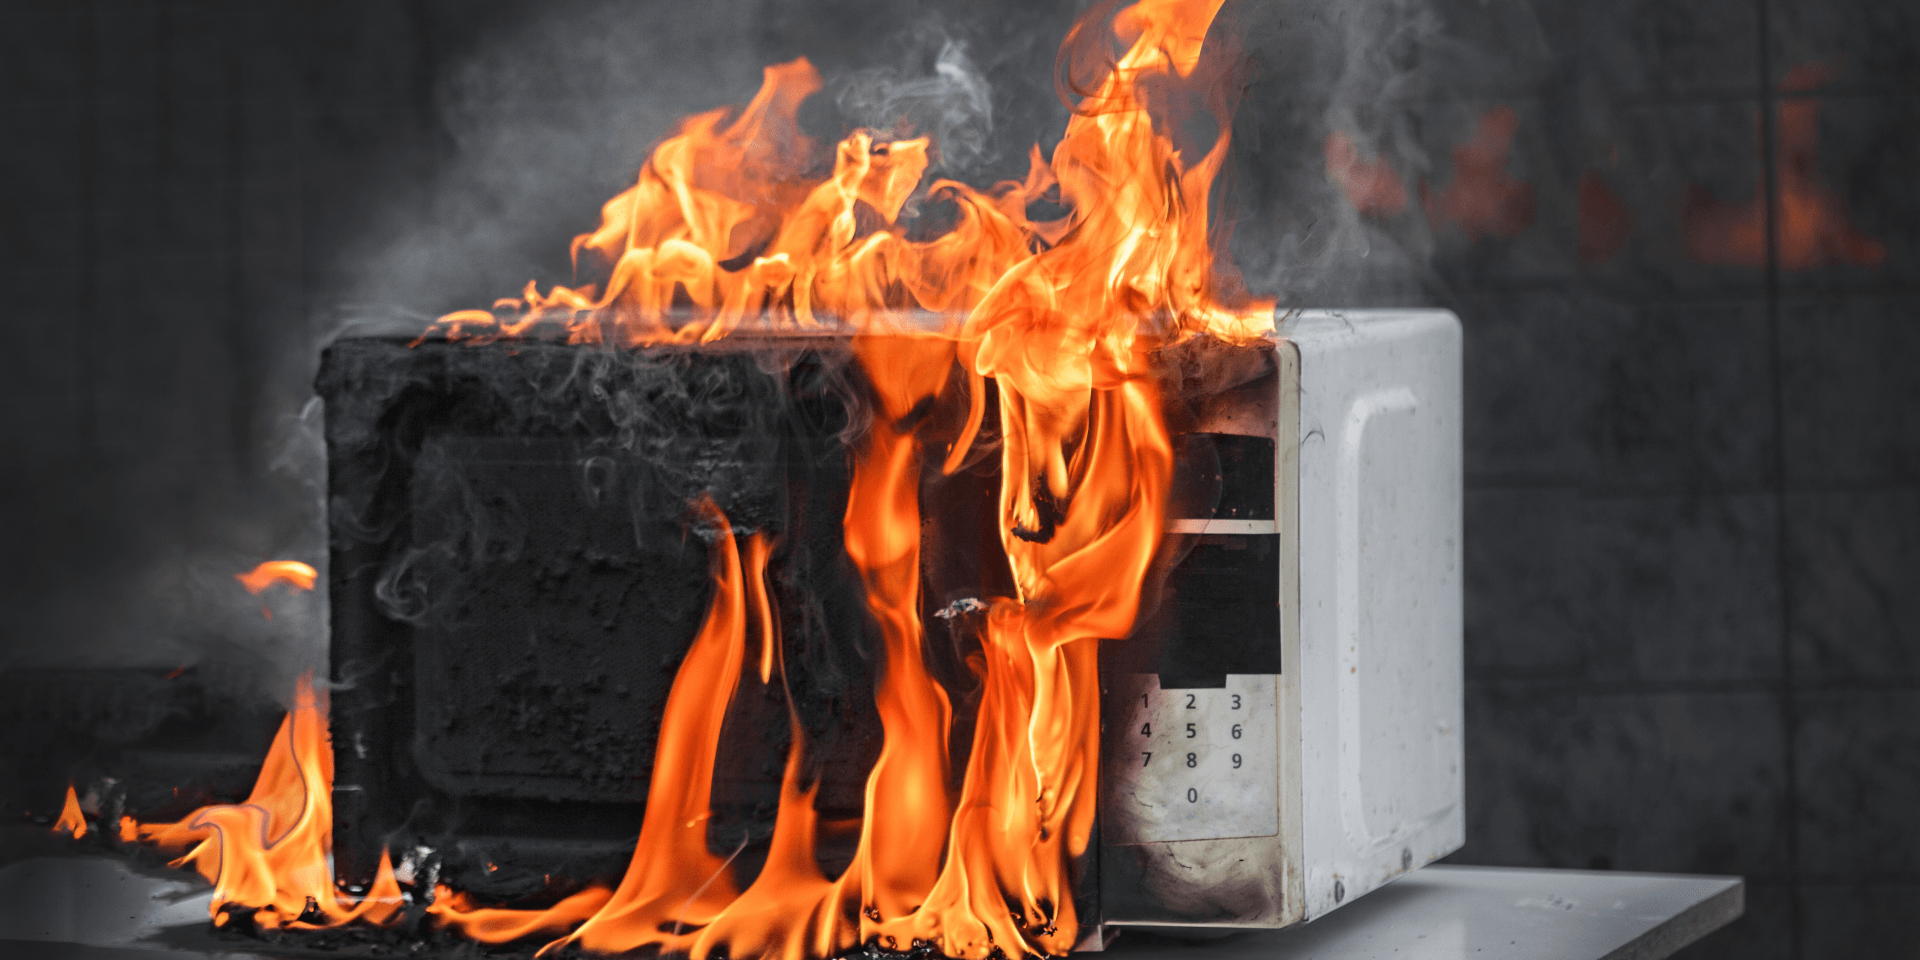 Microwave on fire, faulty electrical appliance